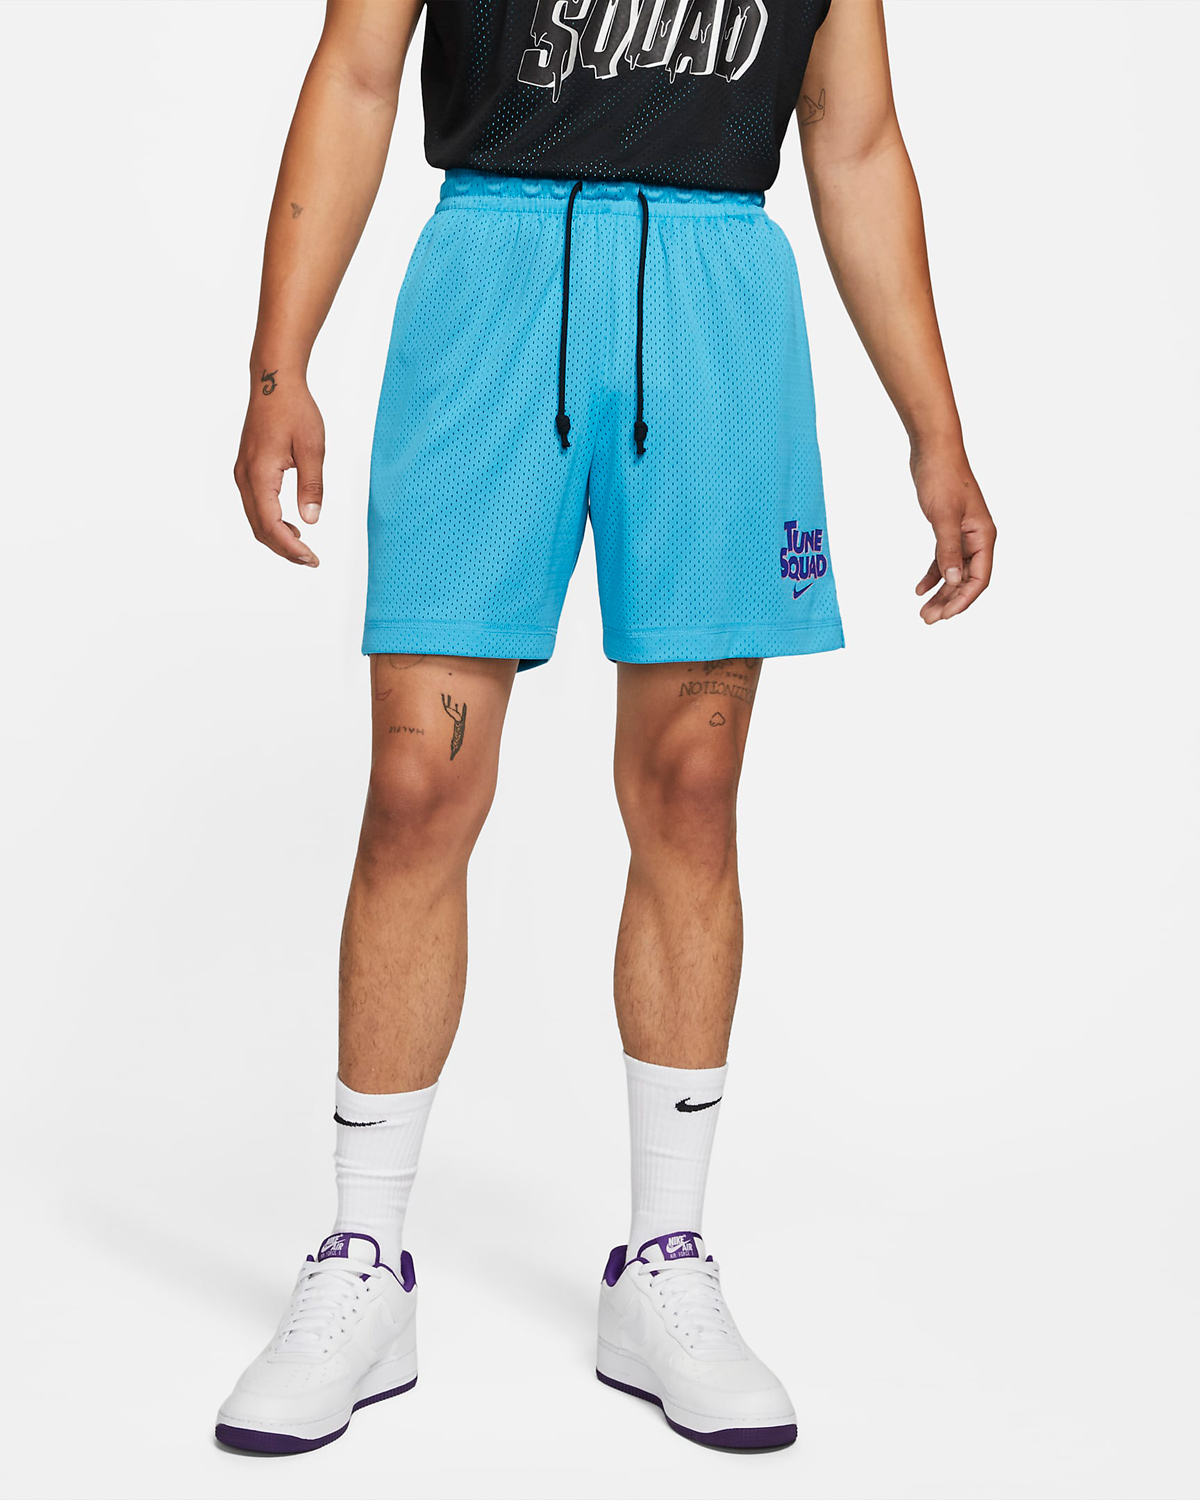 nike-space-jam-a-new-legacy-tune-squad-shorts-3